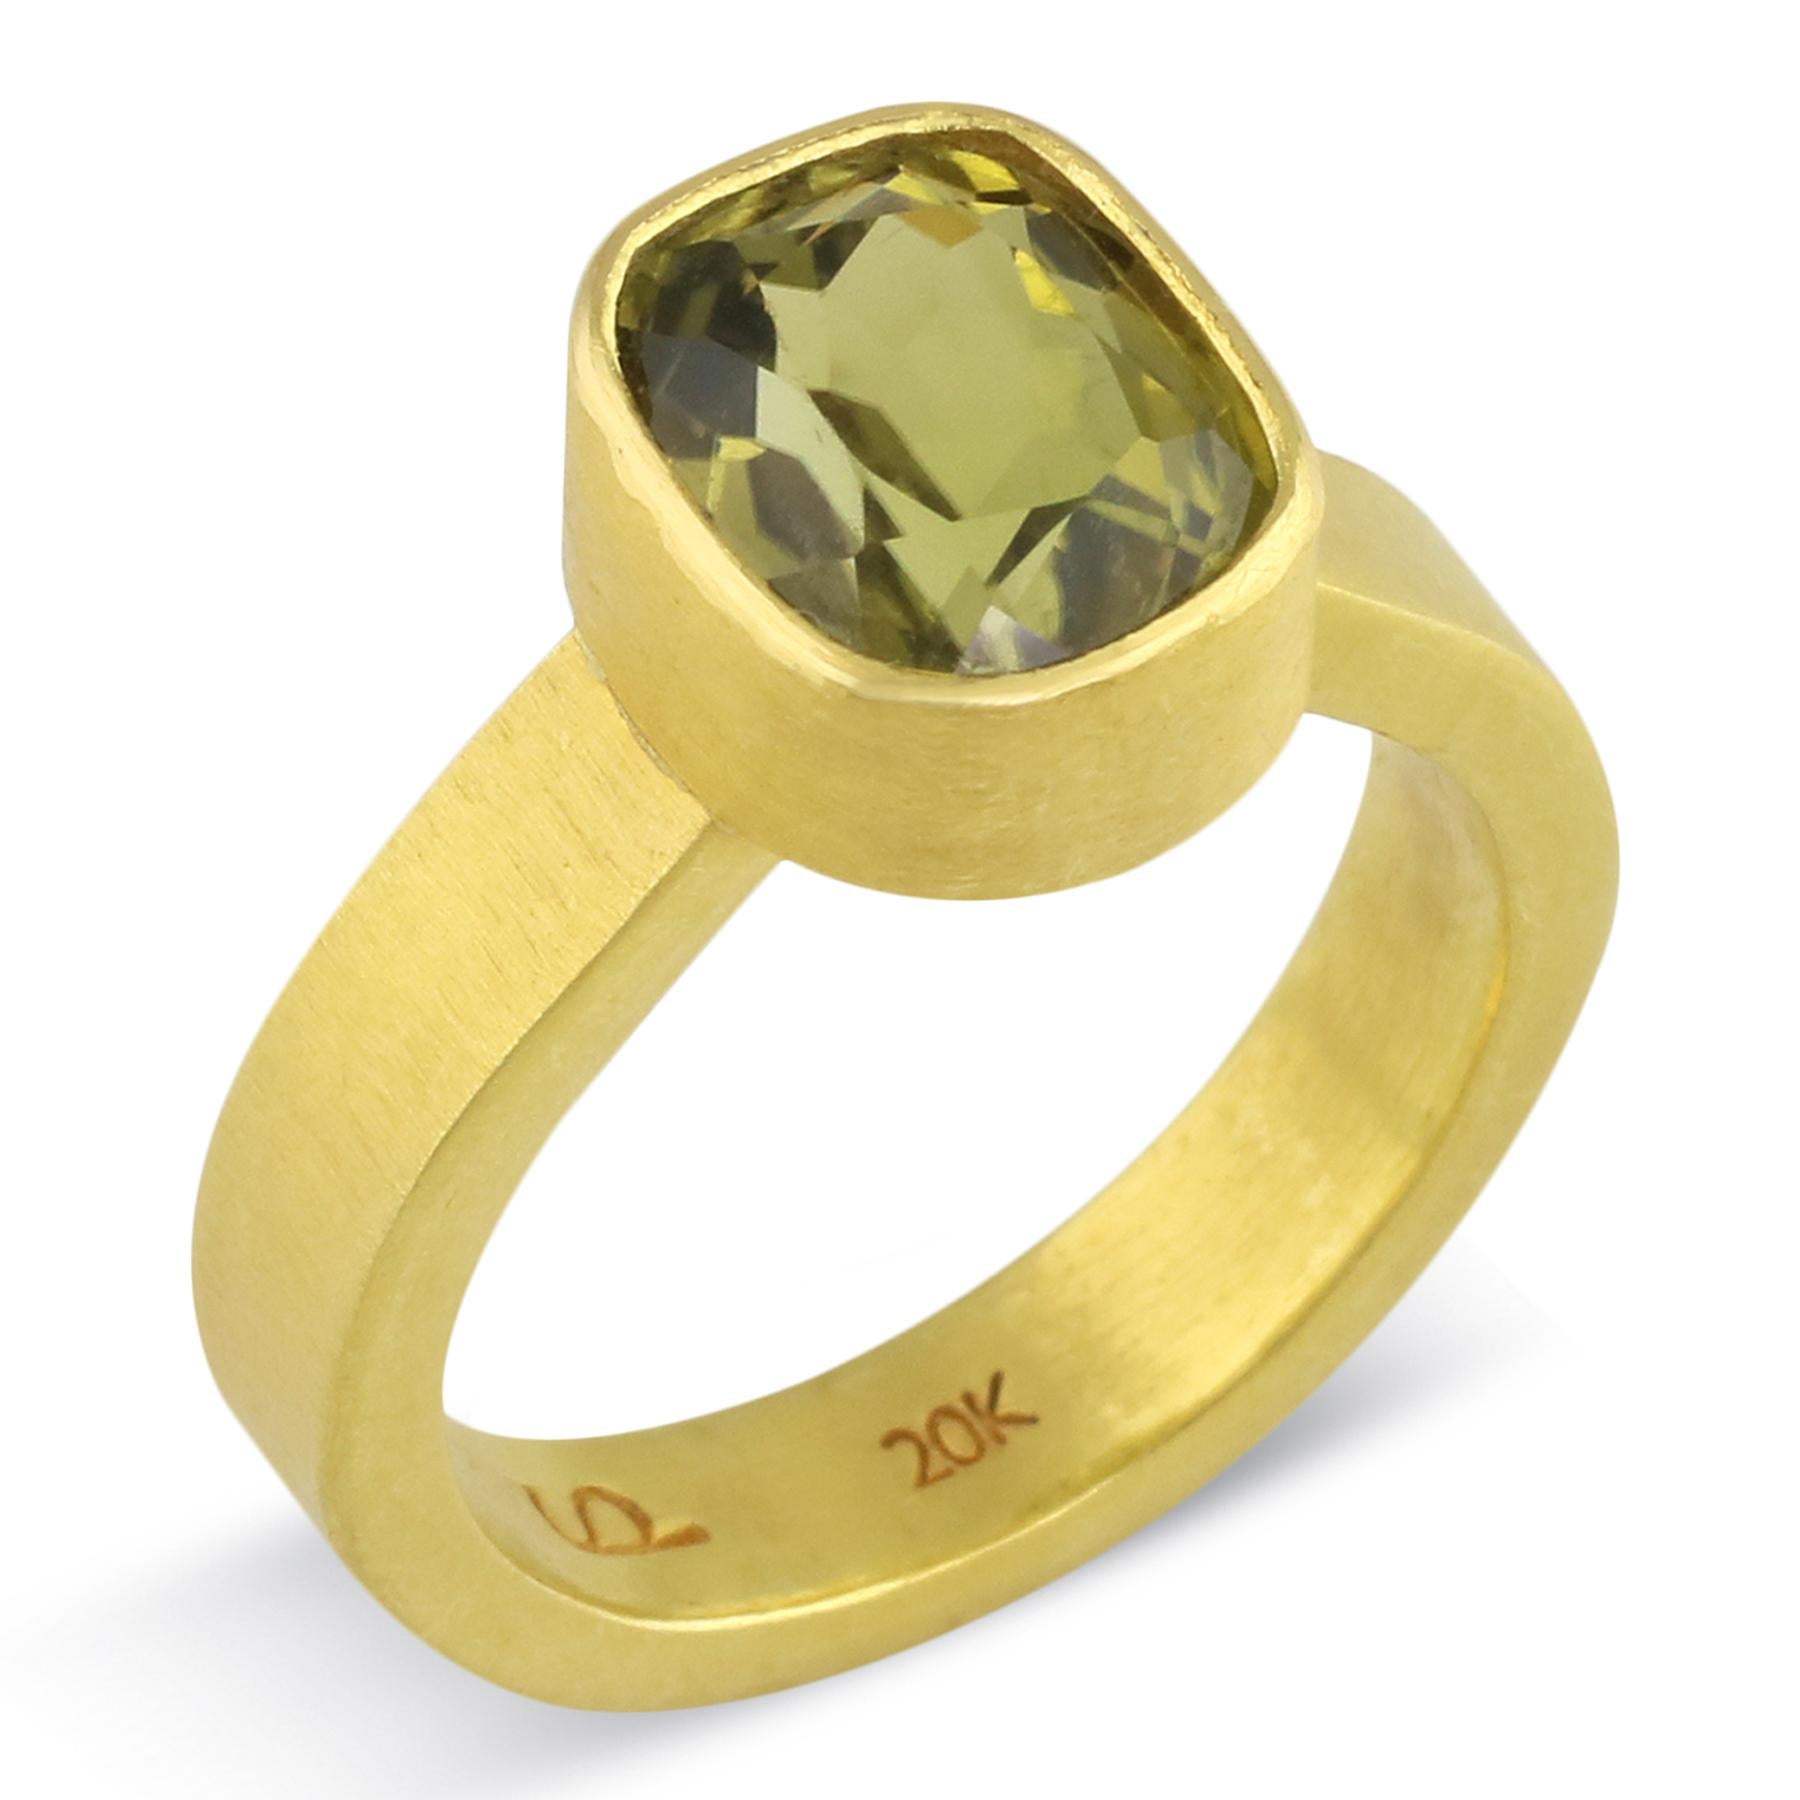 Artisan PHILIPPE SPENCER 3.04 Ct. Tourmaline in 22K and 20K Gold Statement Ring